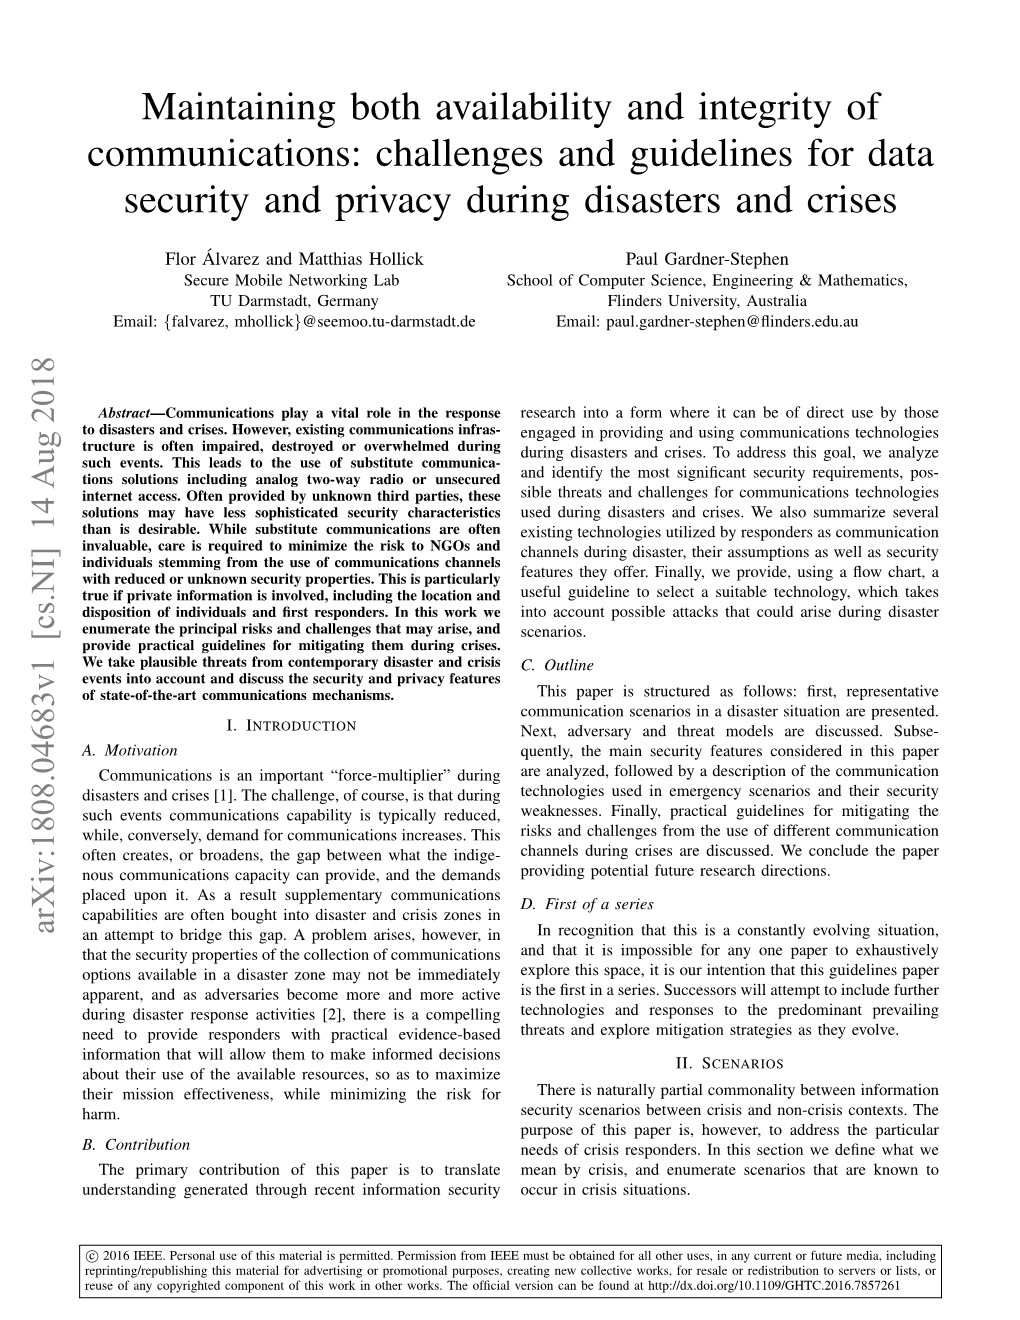 Maintaining Both Availability and Integrity of Communications: Challenges and Guidelines for Data Security and Privacy During Disasters and Crises